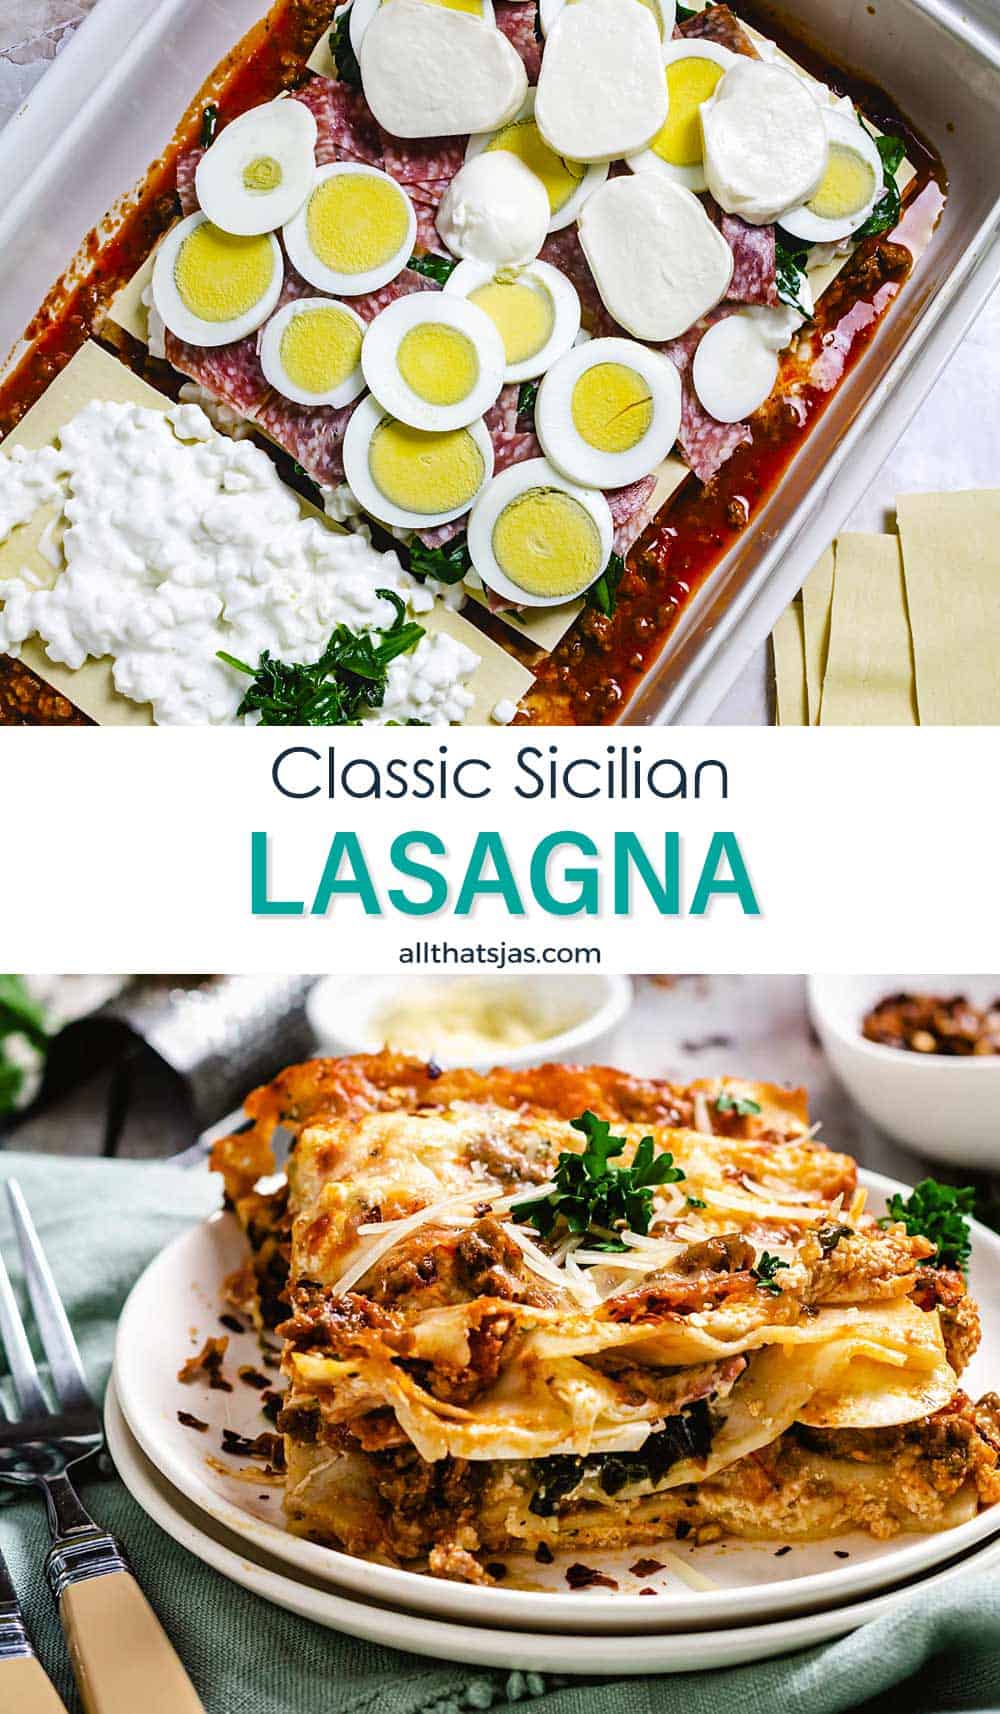 Two photo image of lasagna layers and baked lasagna with text overlay in the middle.